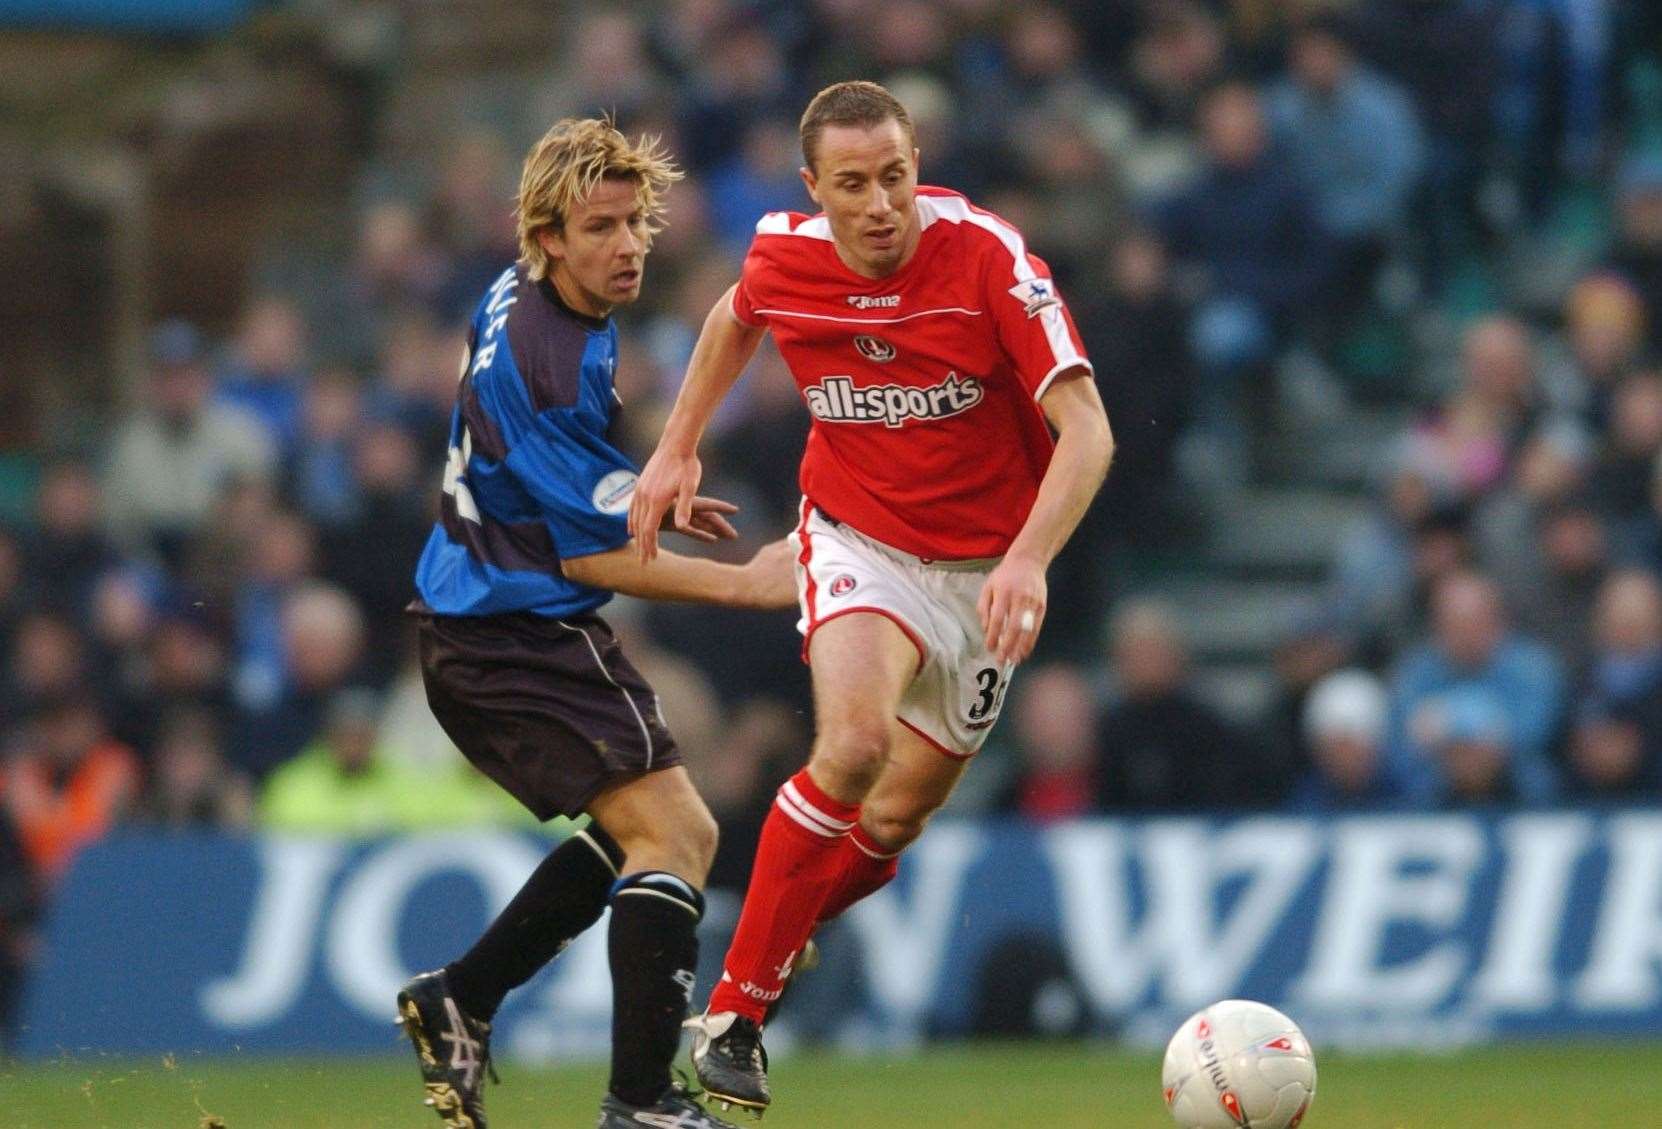 Gillingham's Danny Spiller and Charlton Athletic's Chris Perry